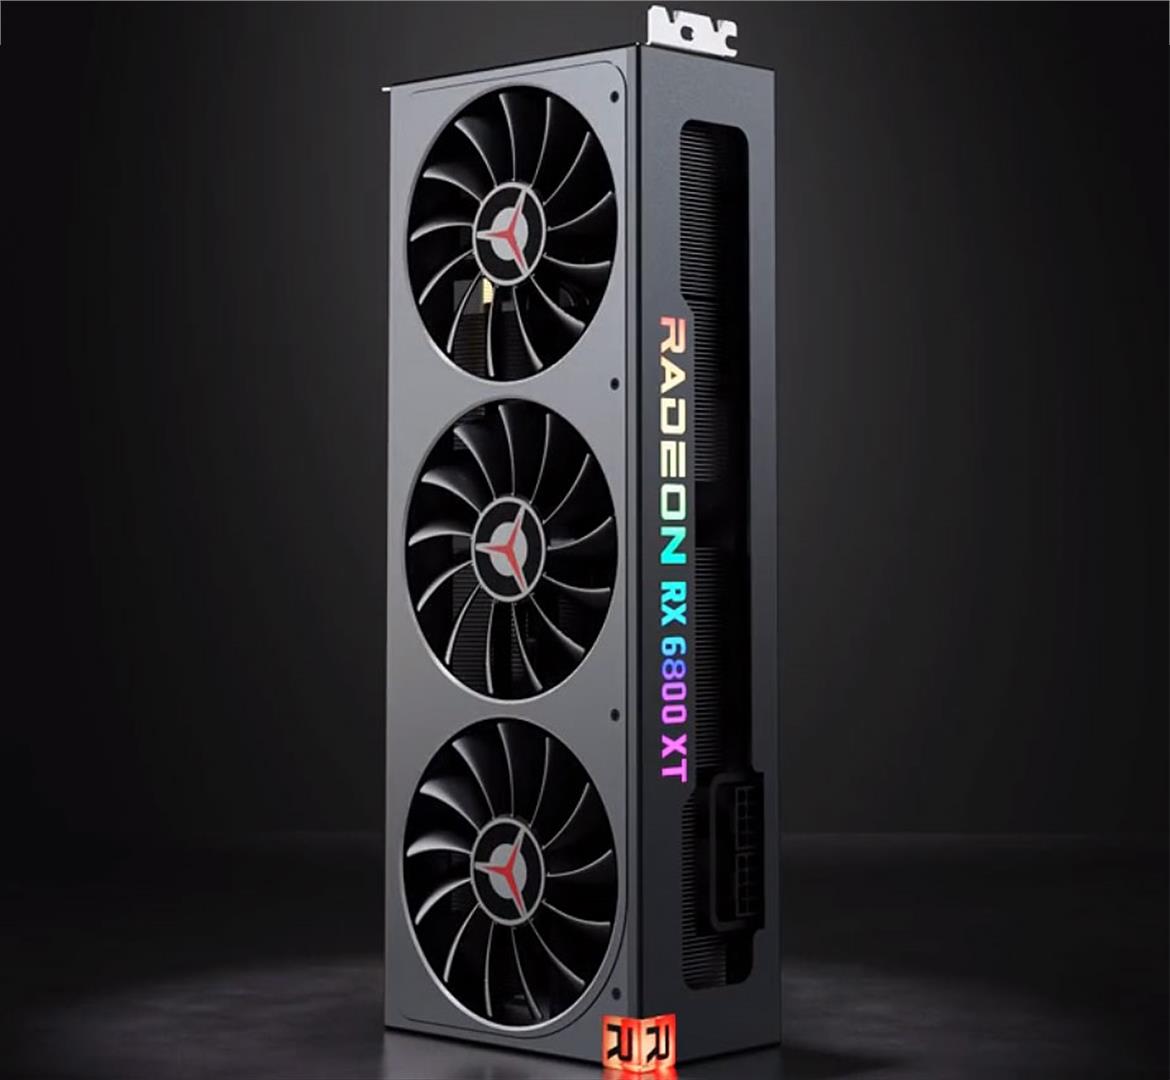 Lenovo Has Its Own Radeon RX 6800 XT That’s A Cool Blast From AMD’s Past